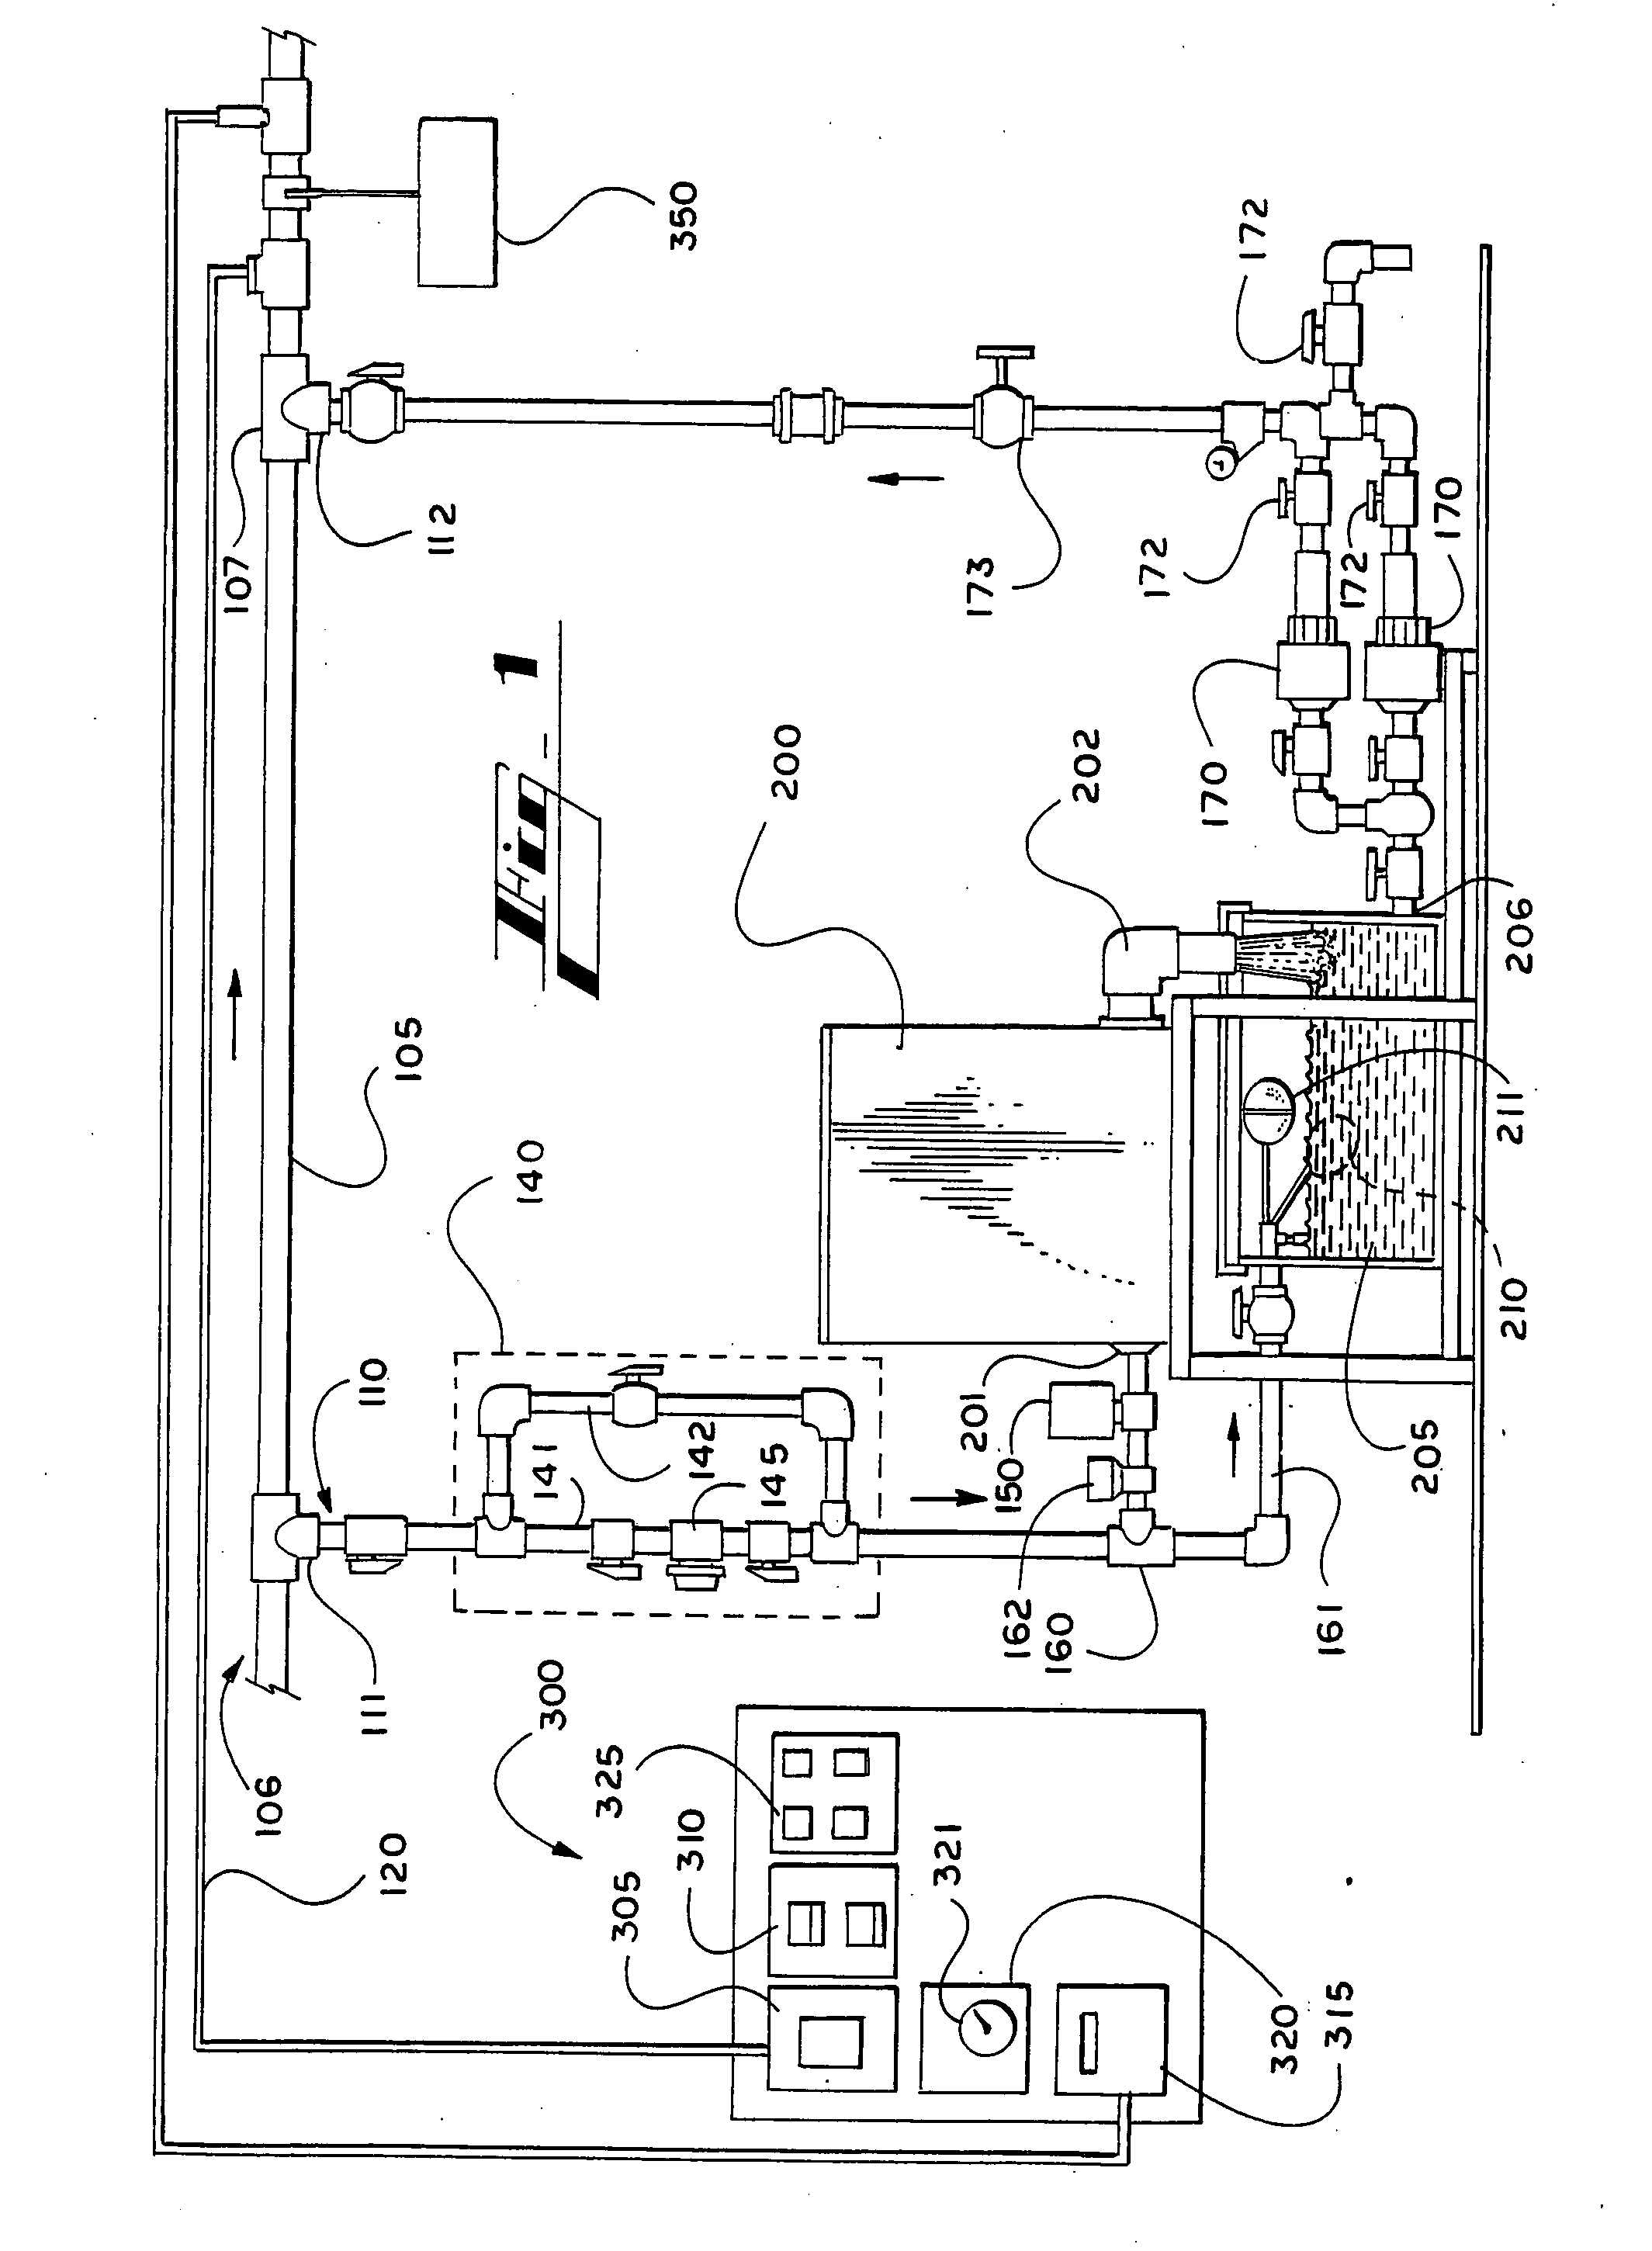 Online poultry reprocessing tablet chlorination system and method